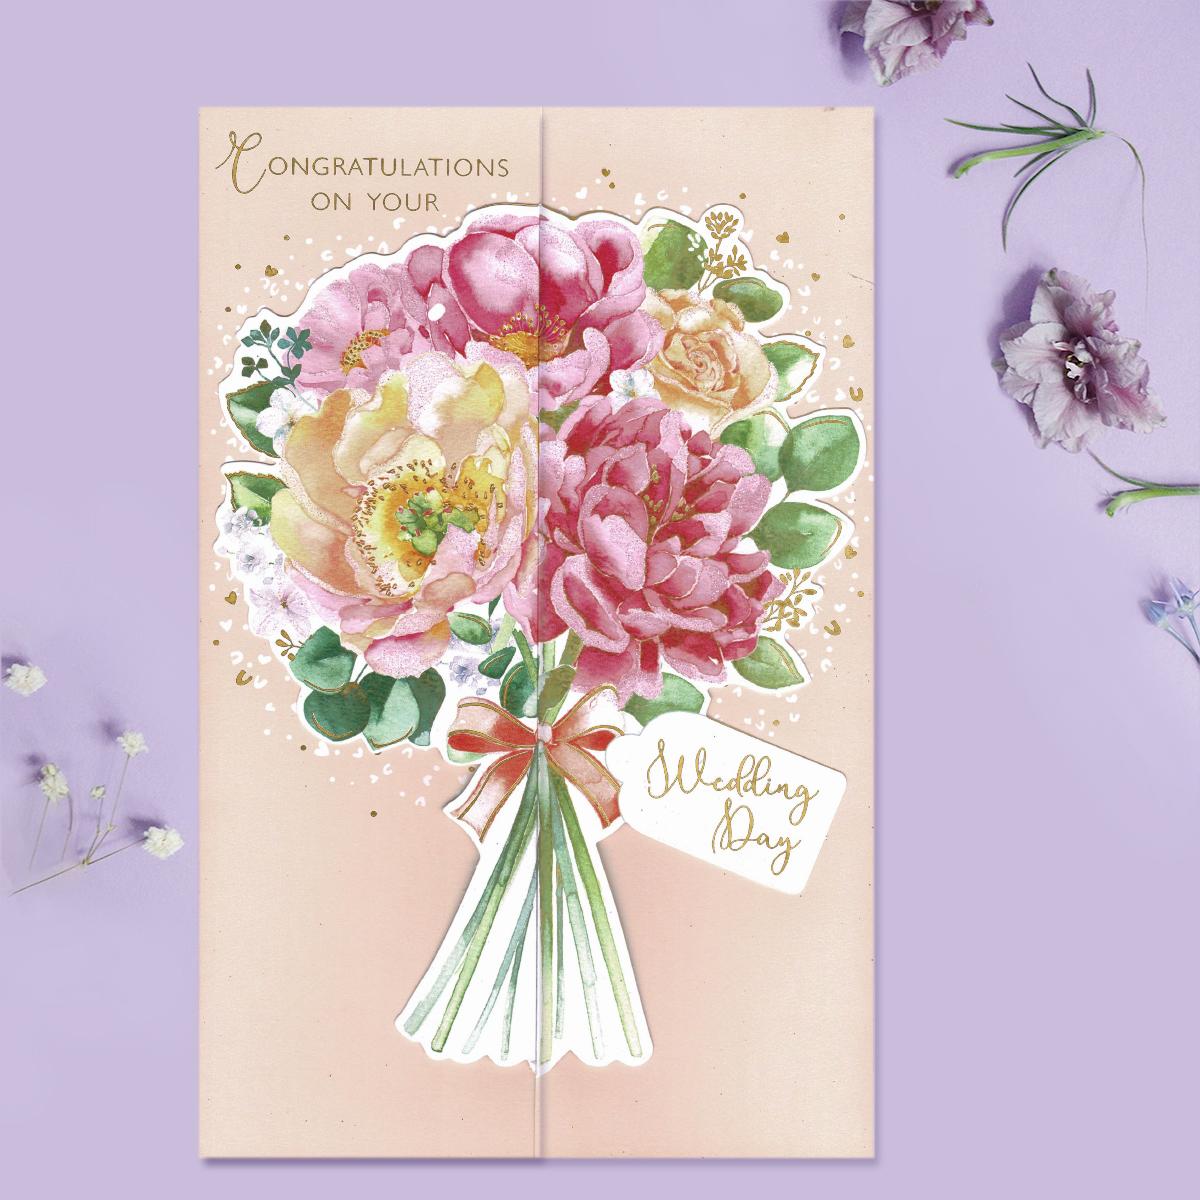 Congratulations Wedding Day Bouquet Card Front Image